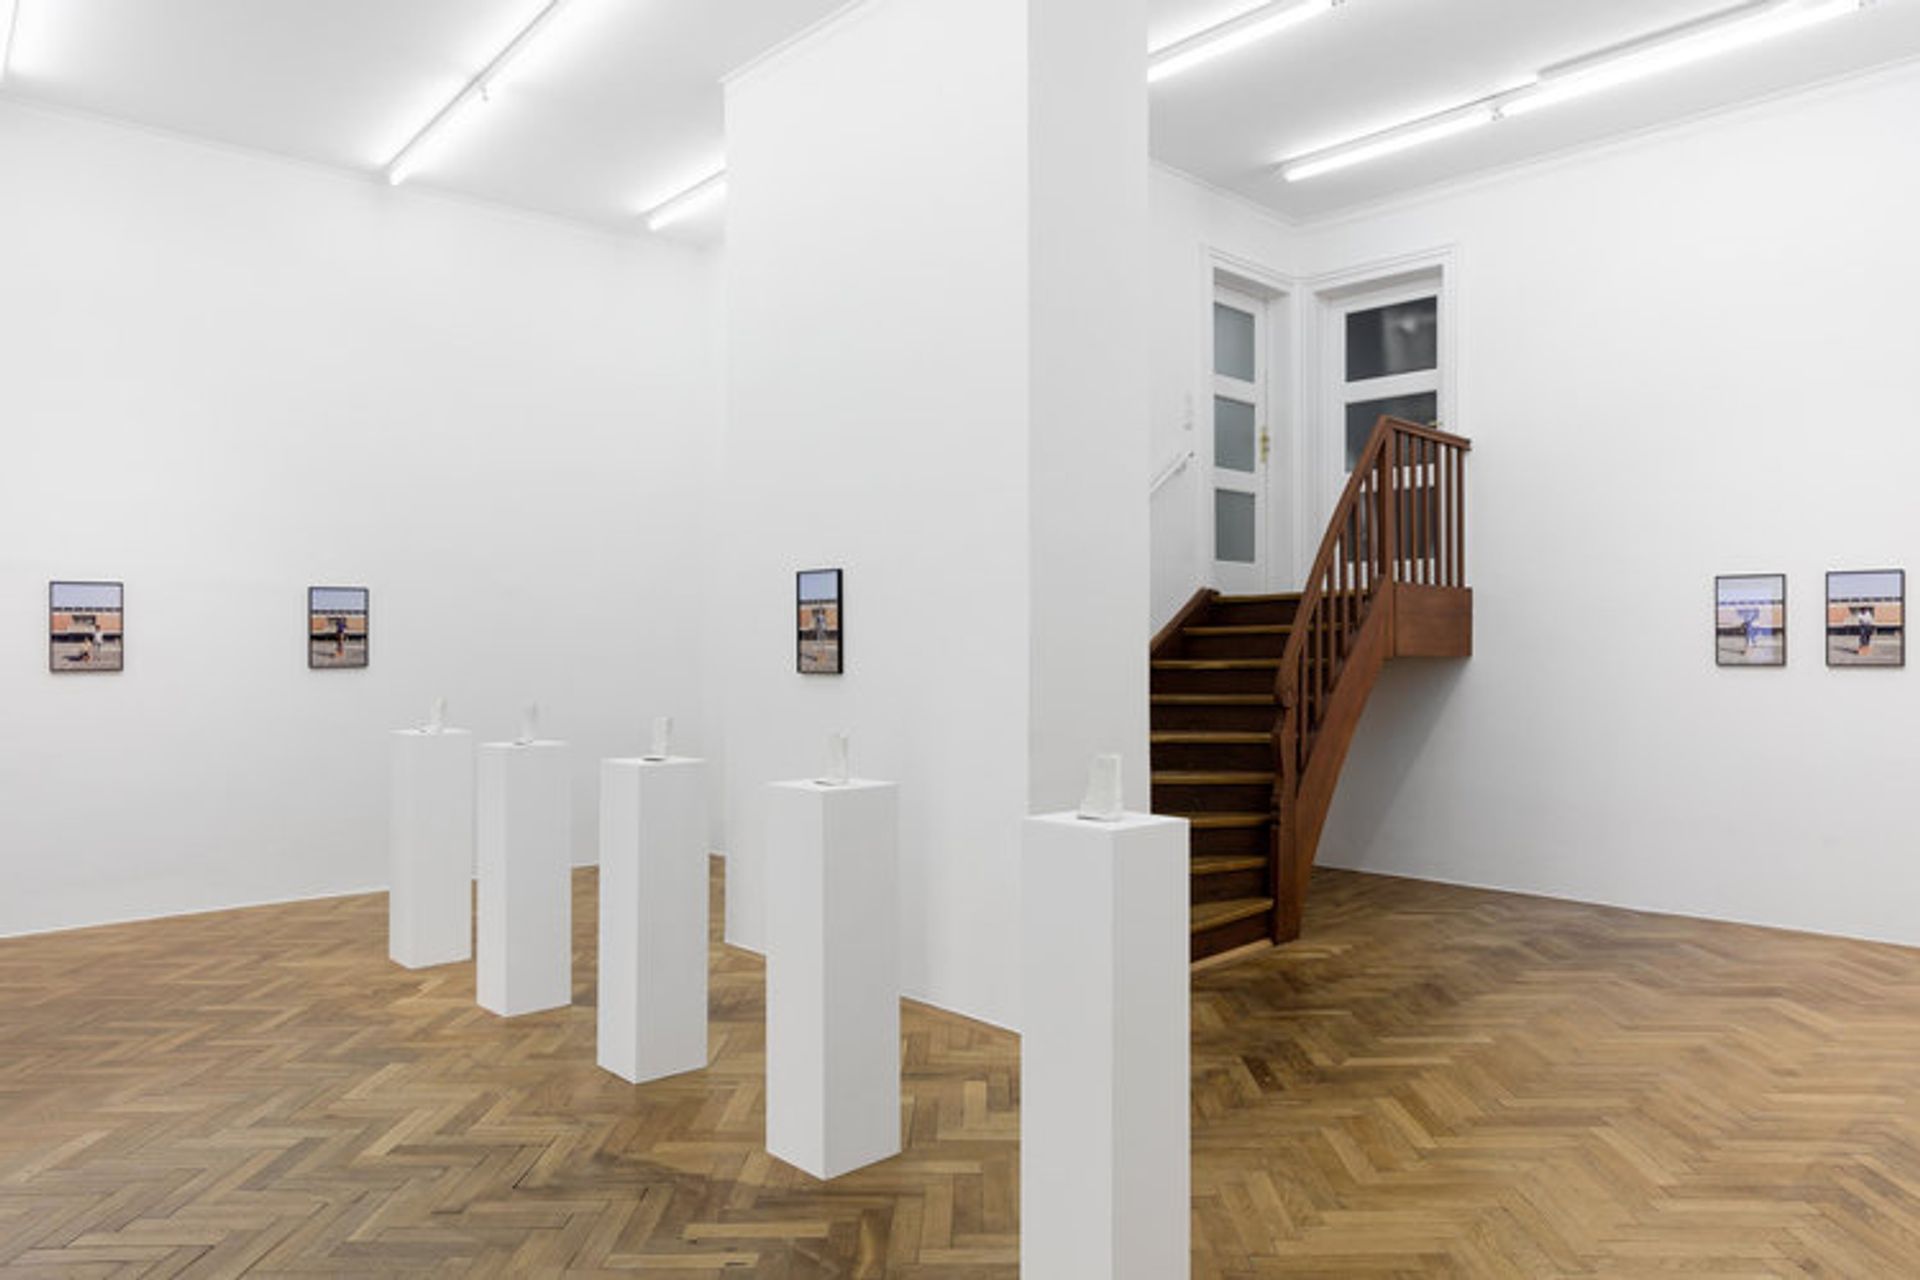 Installation view: Thomas Geiger: “The Great Relief March 29 - May 11”, 2019

Photo: Sebastian Kissel 